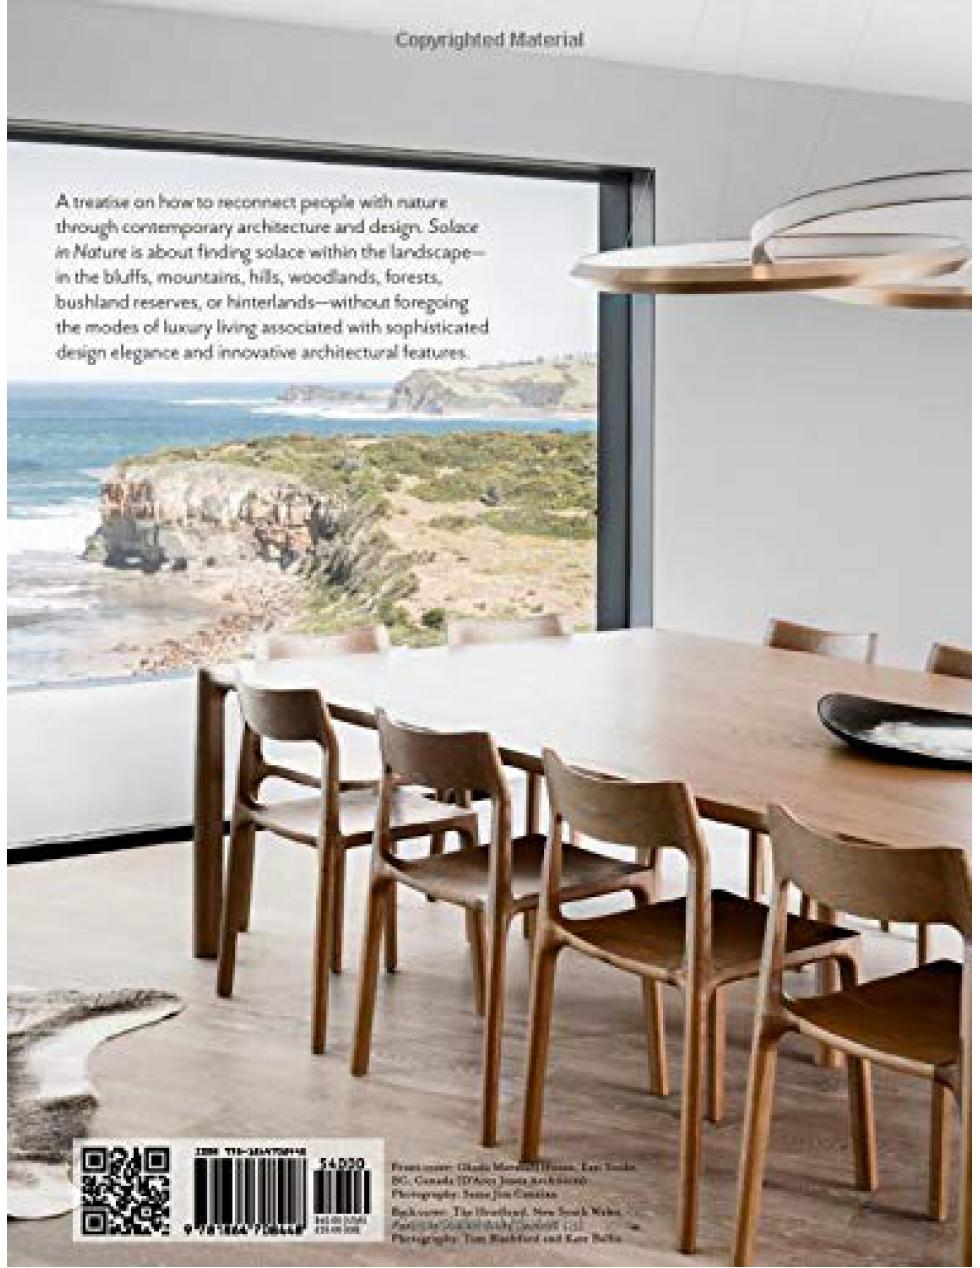 Book: SOLACE IN NATURE - Homes That Blend With The Landscape